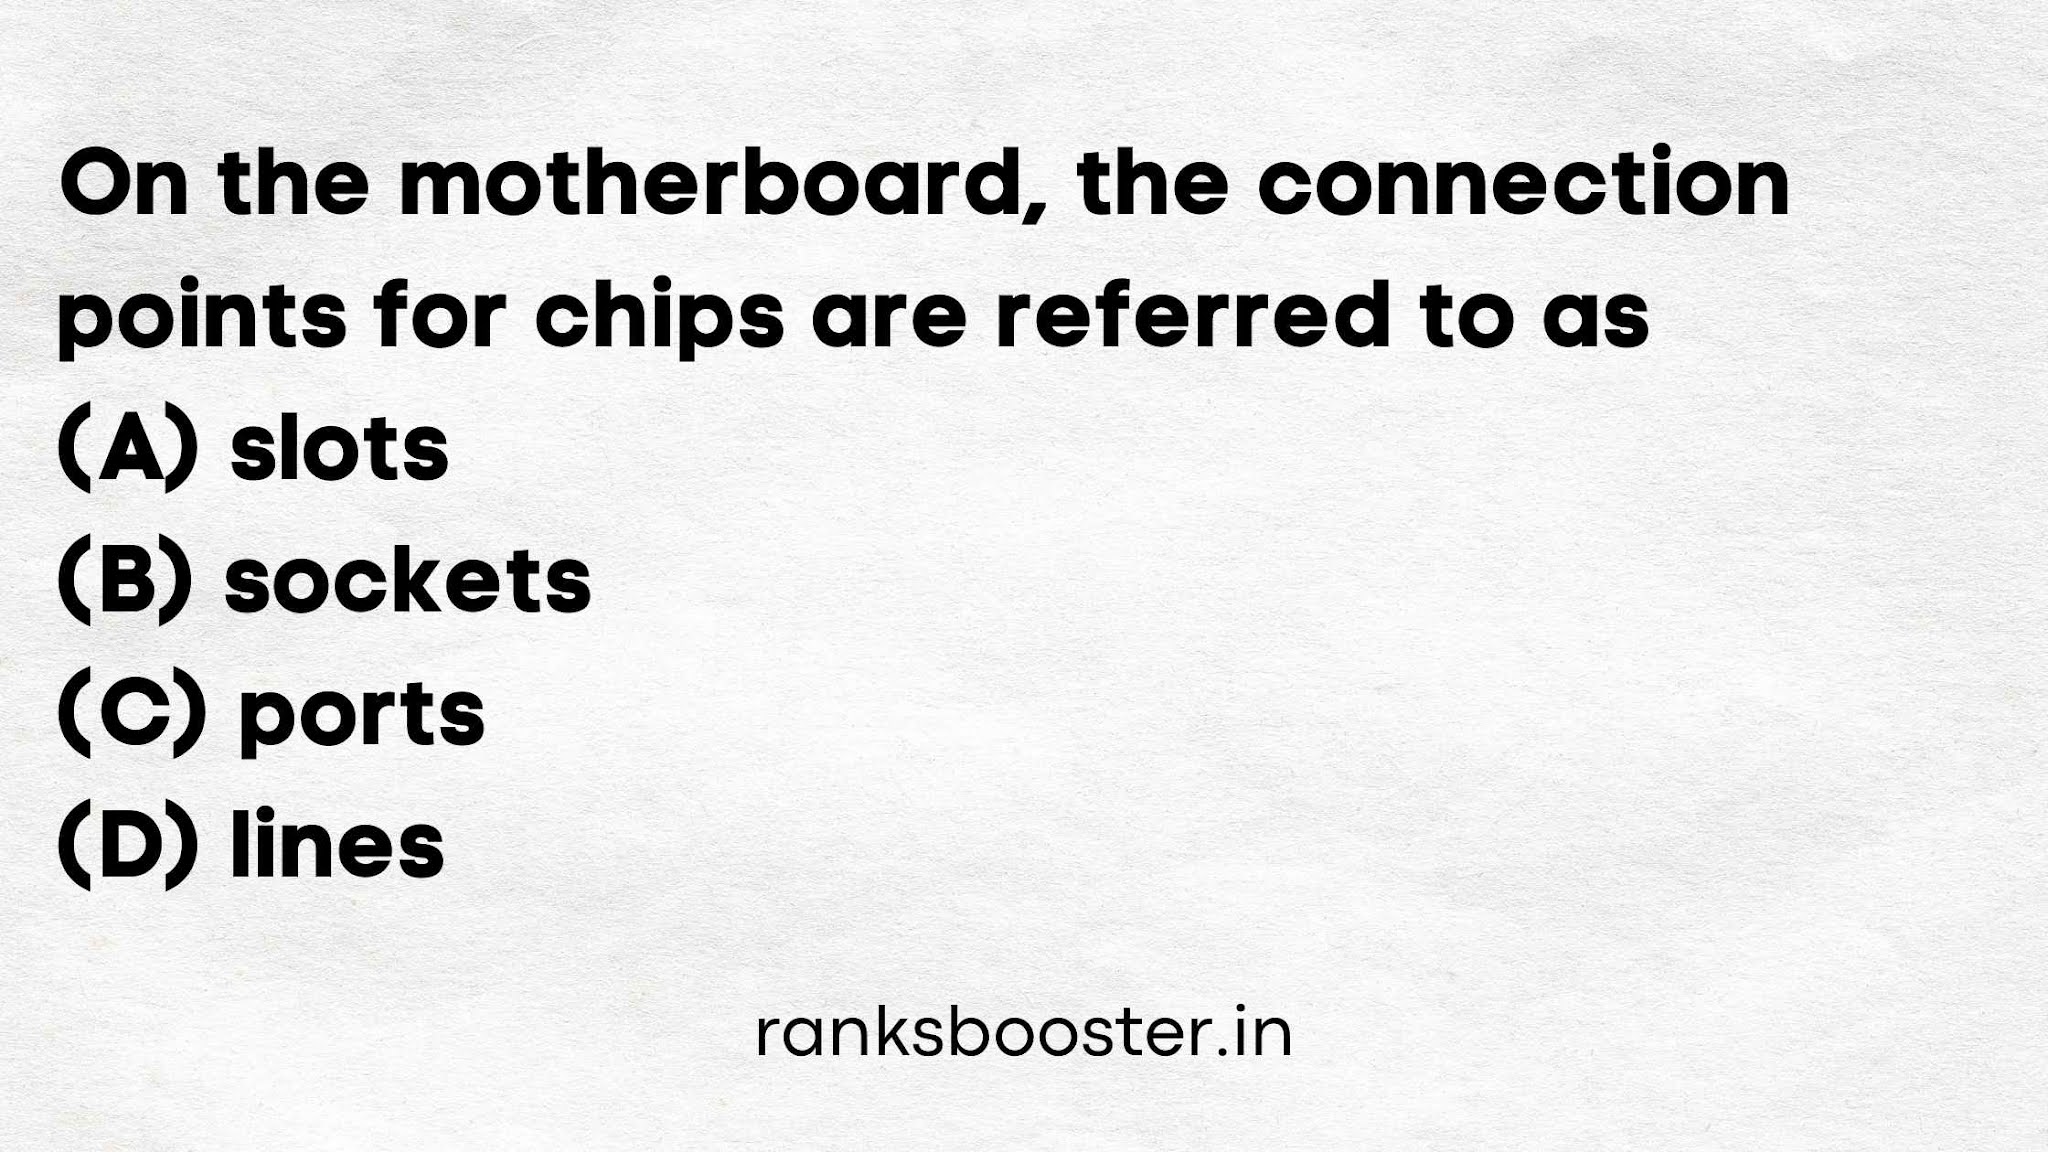 On the motherboard, the connection points for chips are referred to as (A) slots (B) sockets (C) ports (D) lines